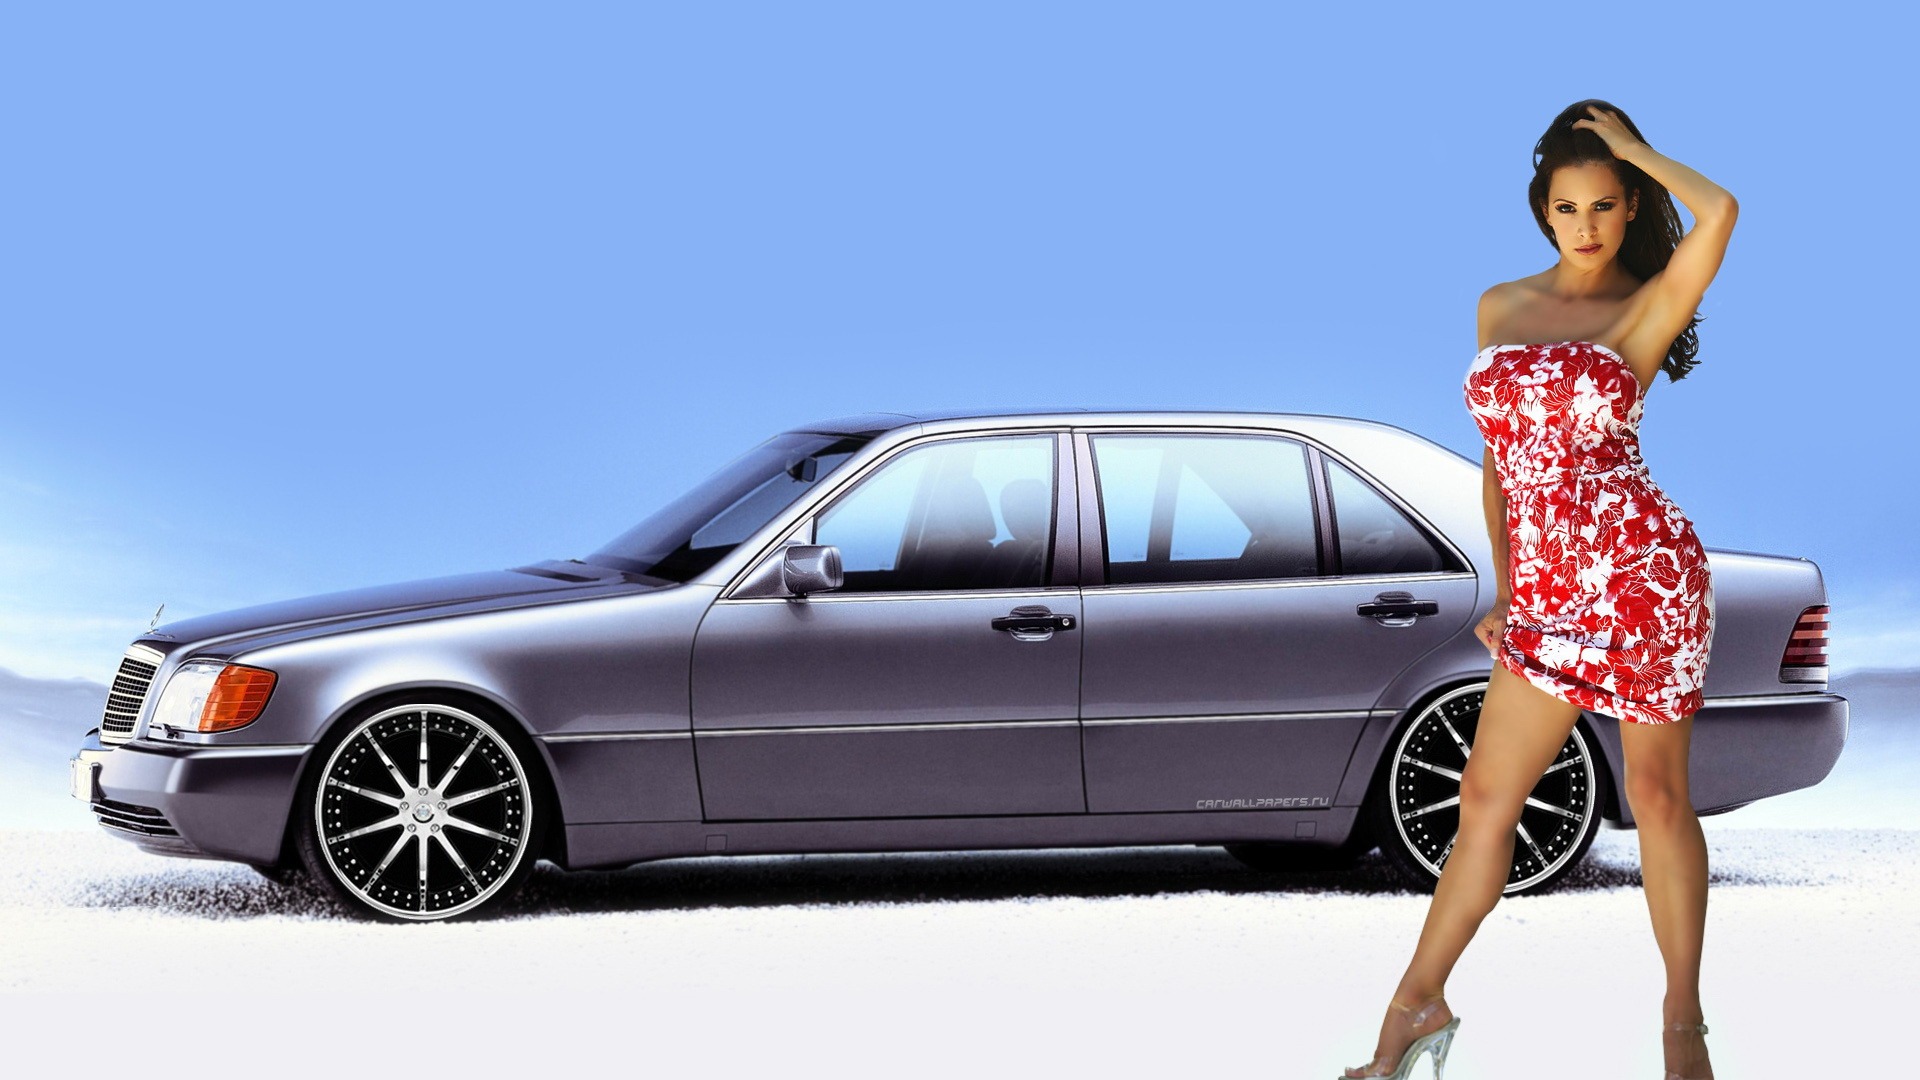 Cars and Girls wallpapers (1) #4 - 1920x1080